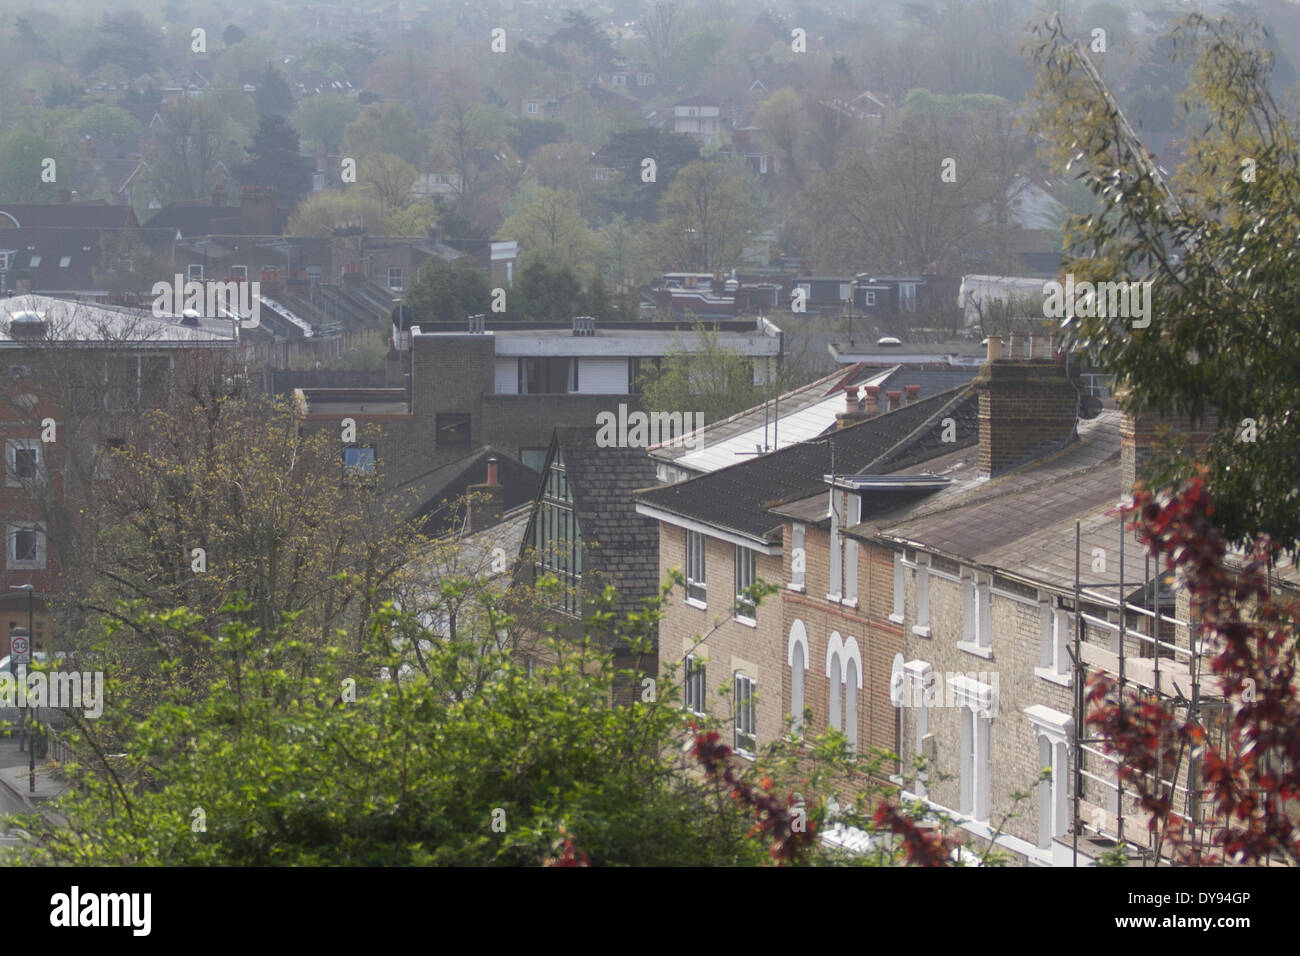 Wimbledon London, UK. 10th April 2014.  House prices continued their upward trend with a 15 month consecutive rise to reach a six year high according to the (NBS) Nationwide Building Society Credit:  amer ghazzal/Alamy Live News Stock Photo